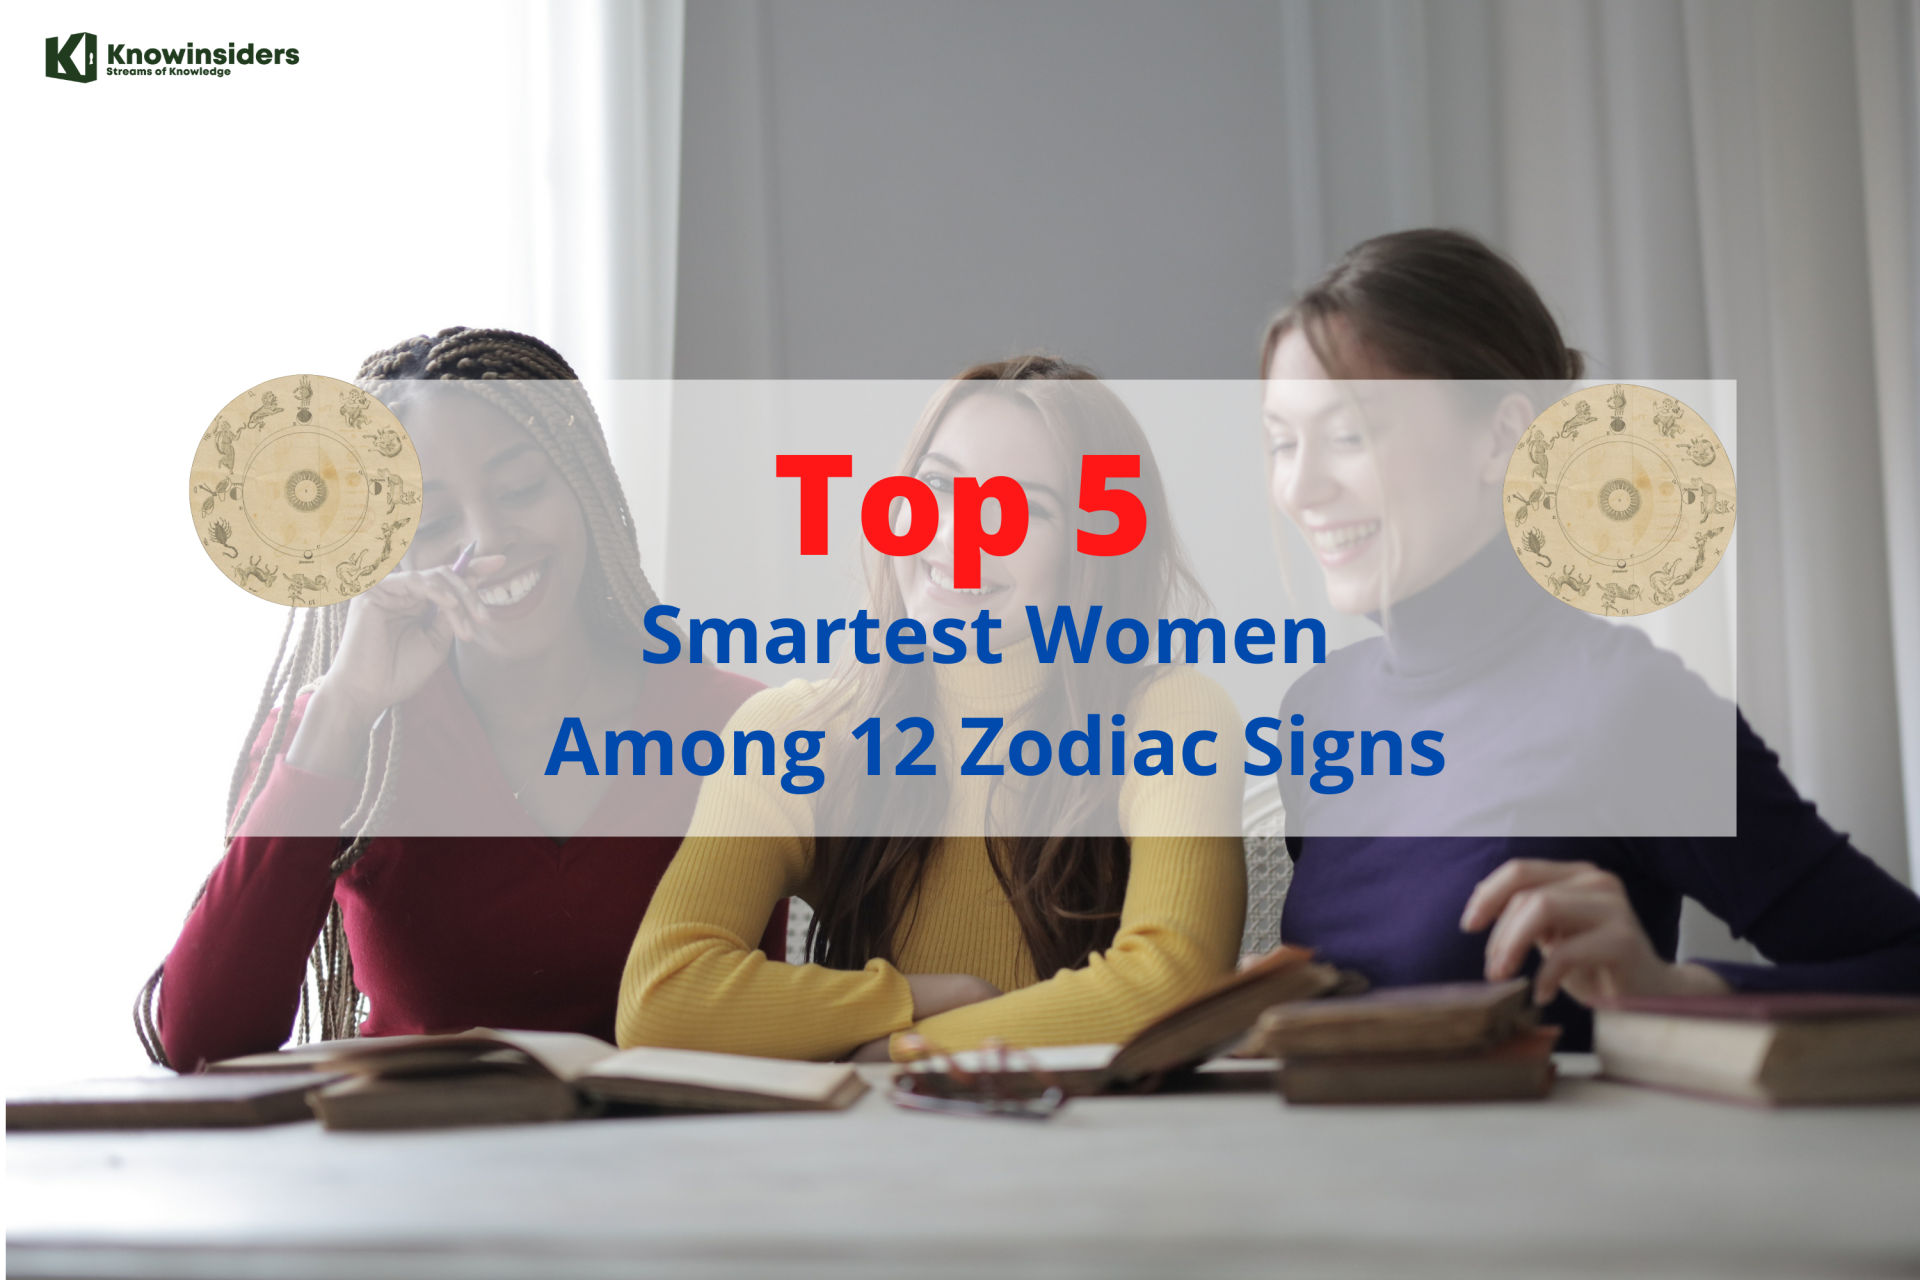 Top 5 Smartest Women Among the Zodiac Signs